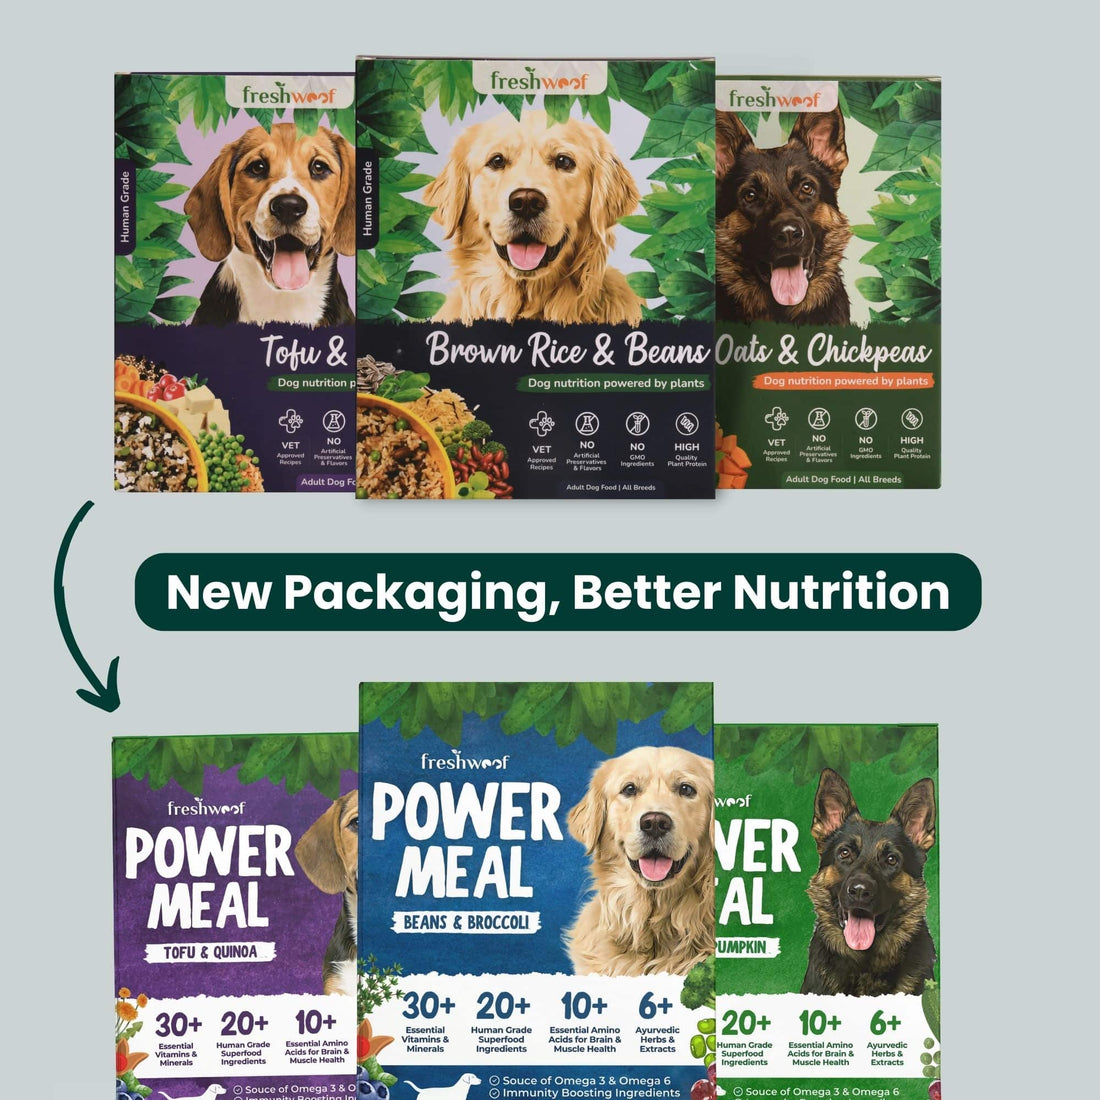 Power Meals | 100% Natural Wet Dog Food with Added Vitamins & Minerals (Oats & Pumpkin)